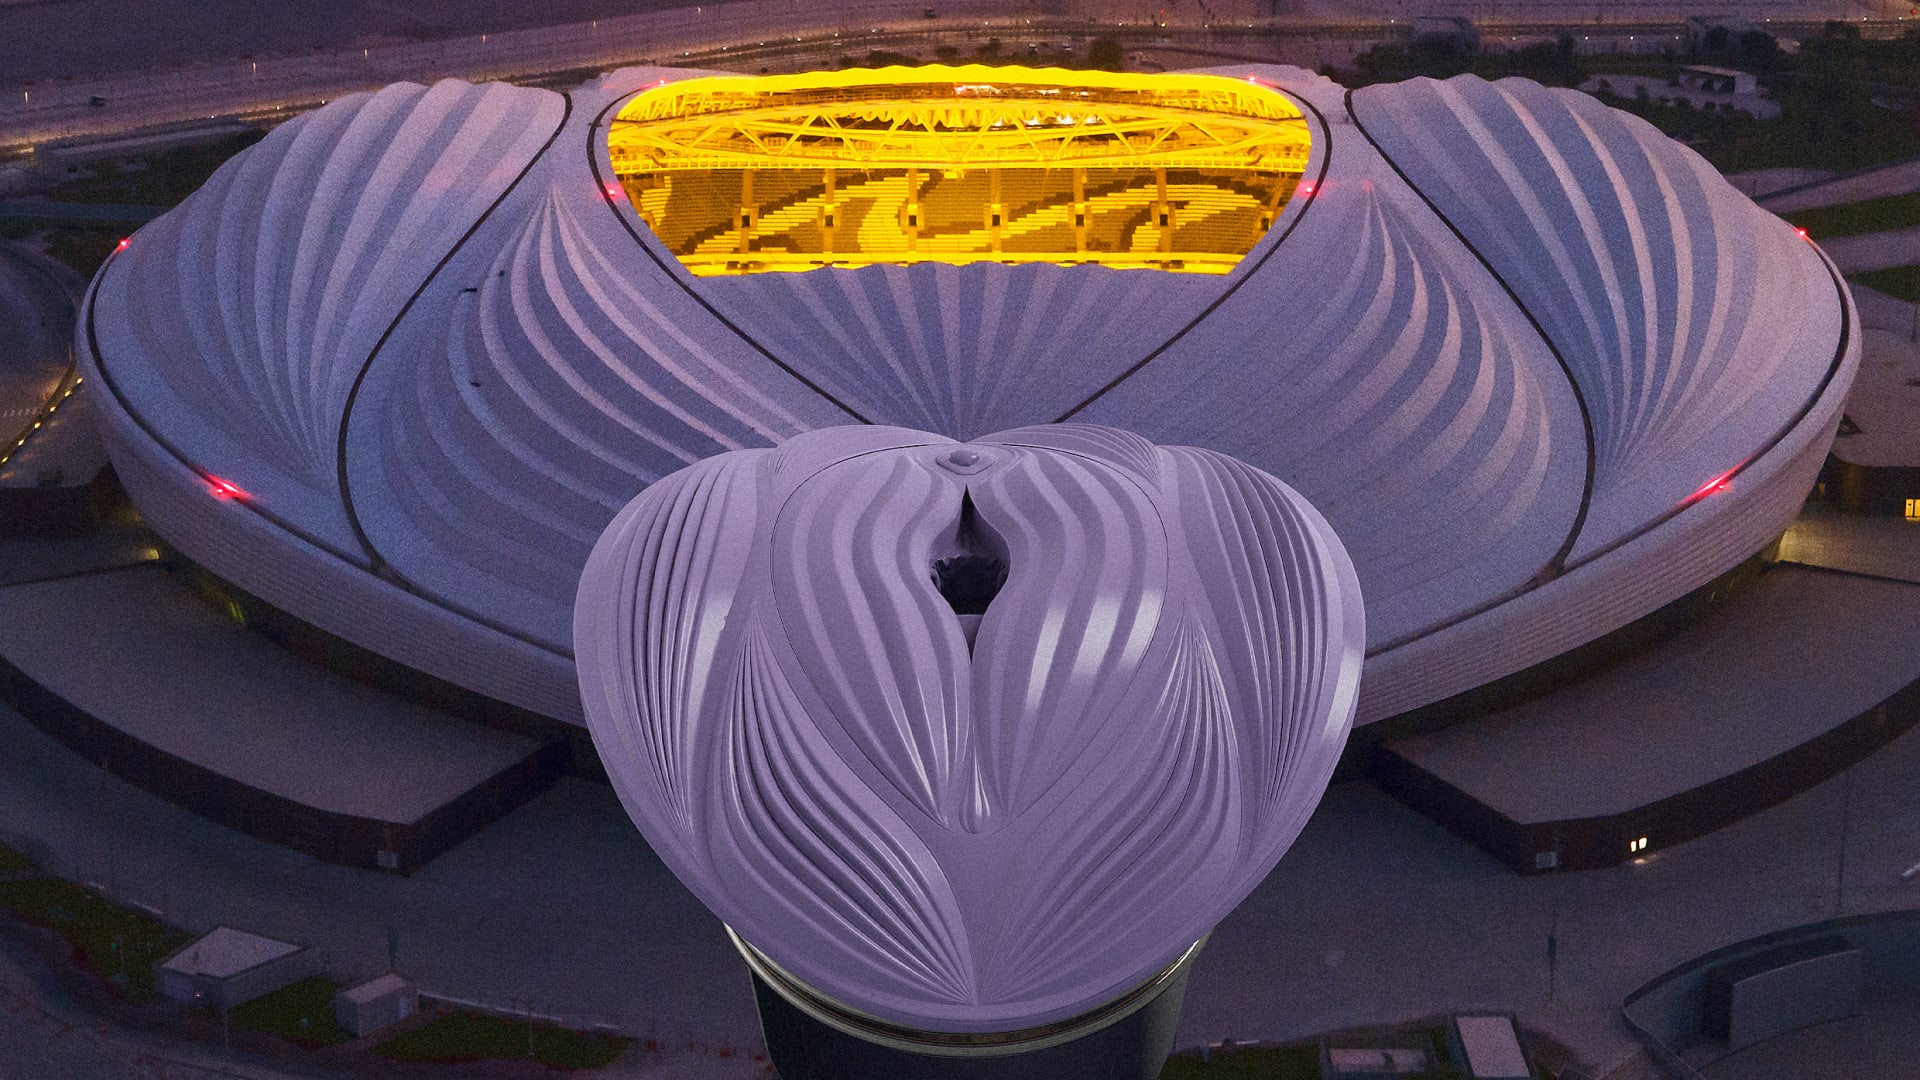 Doha’s World Cup stadium is now a sex toy